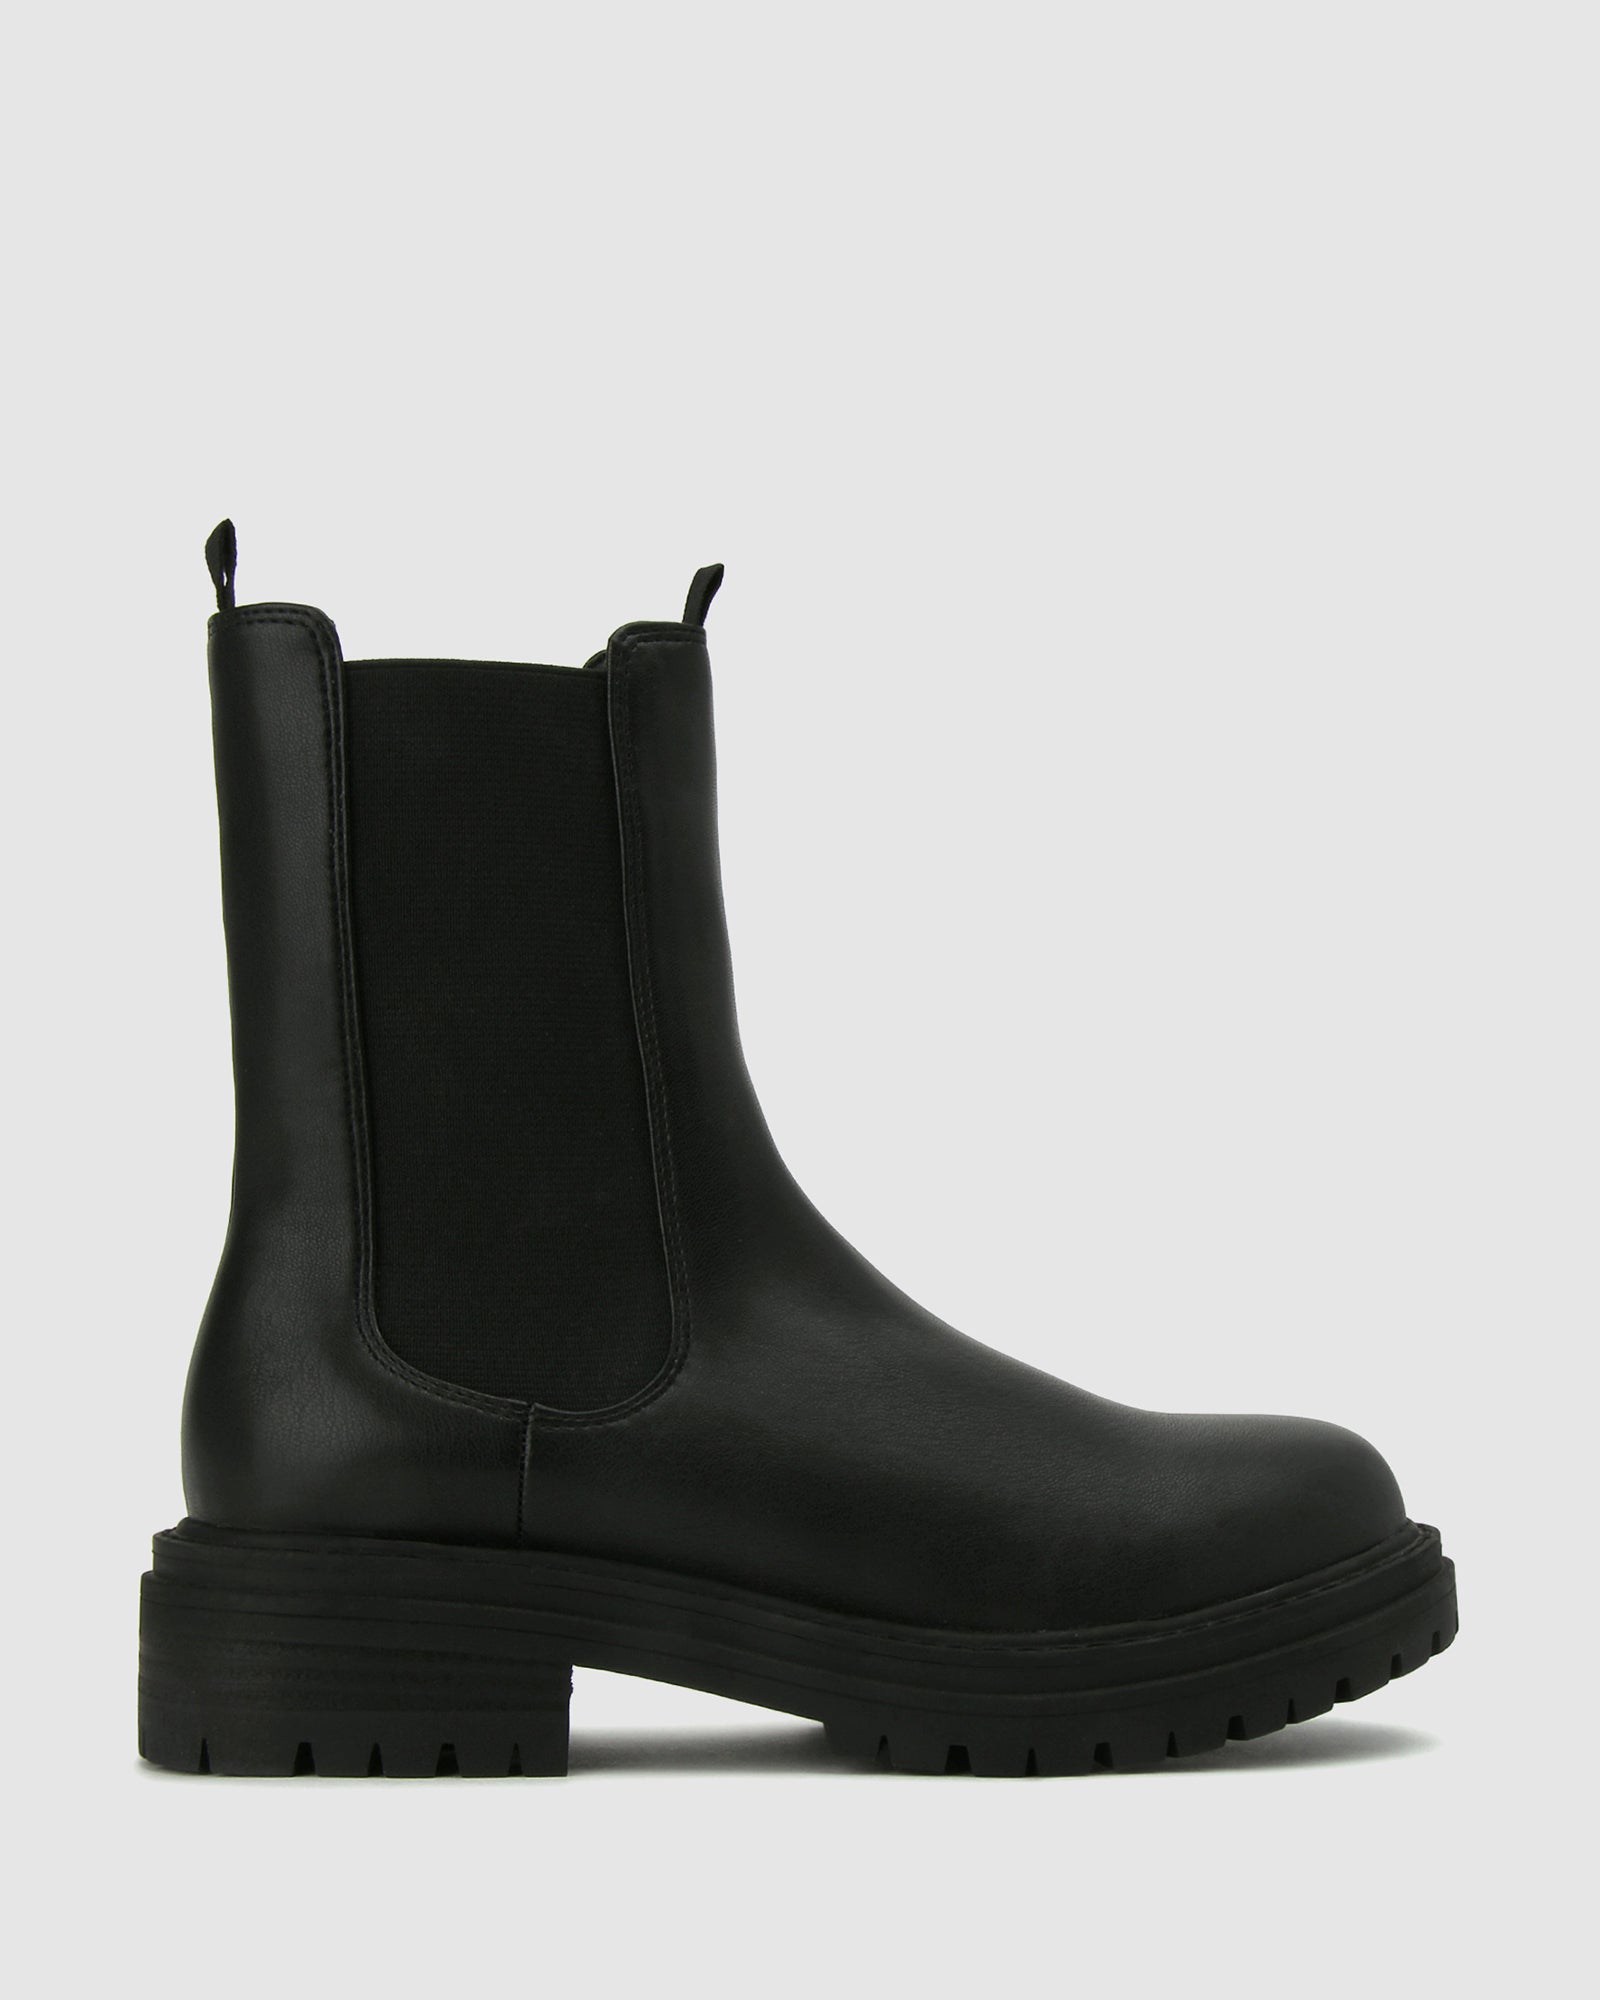 Buy DELTA Chelsea Round Toe Boots by Betts online - Betts